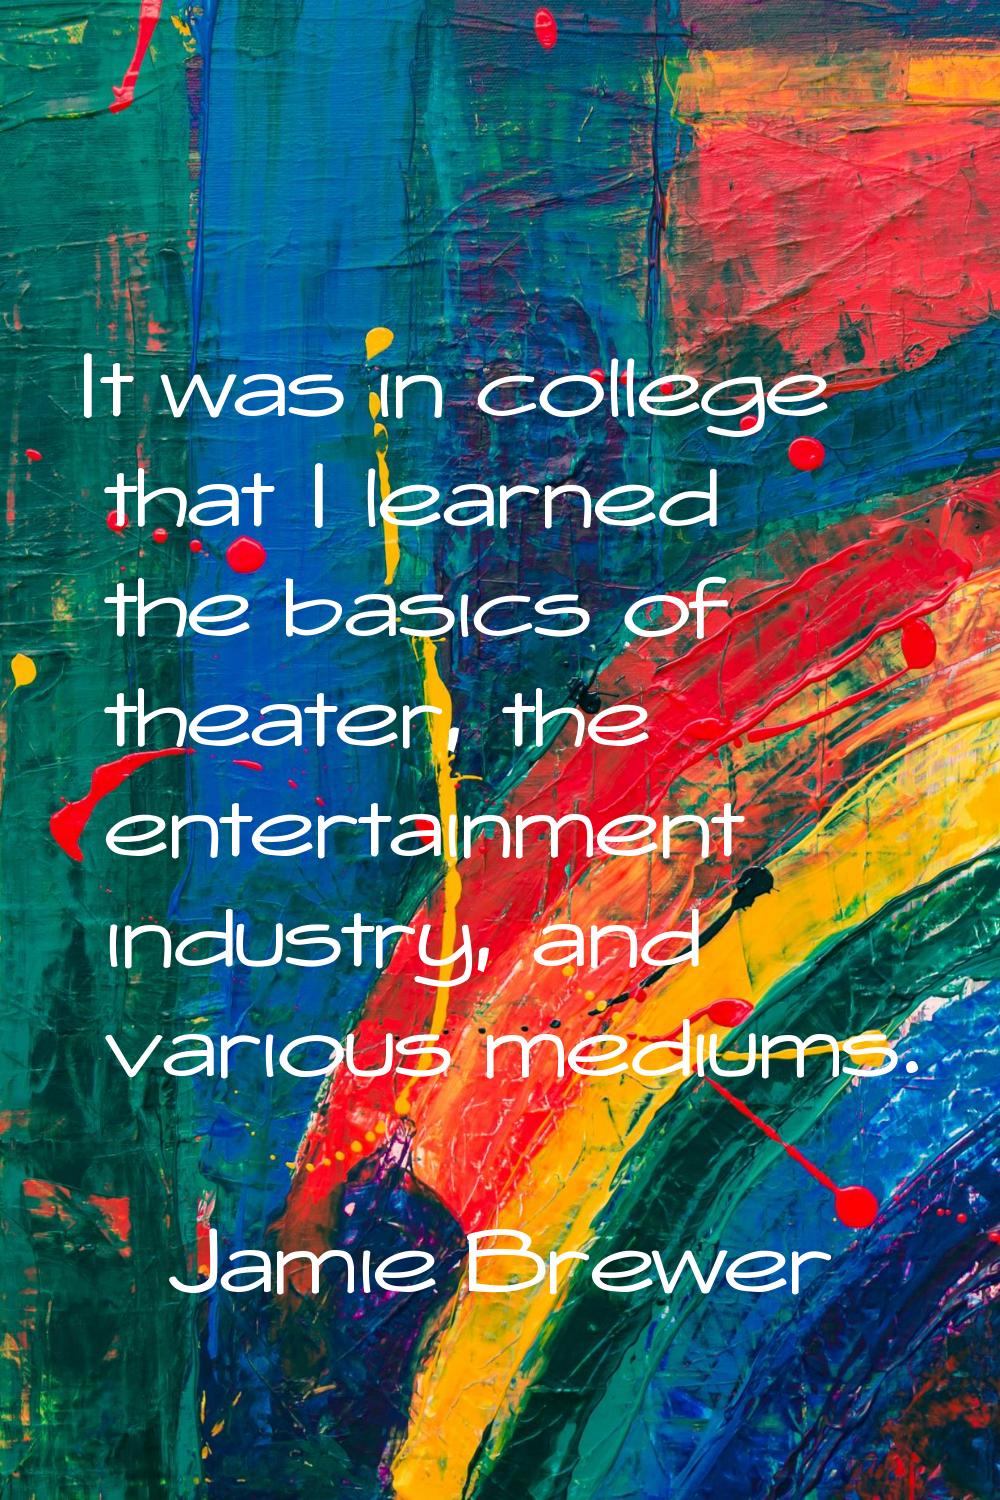 It was in college that I learned the basics of theater, the entertainment industry, and various med